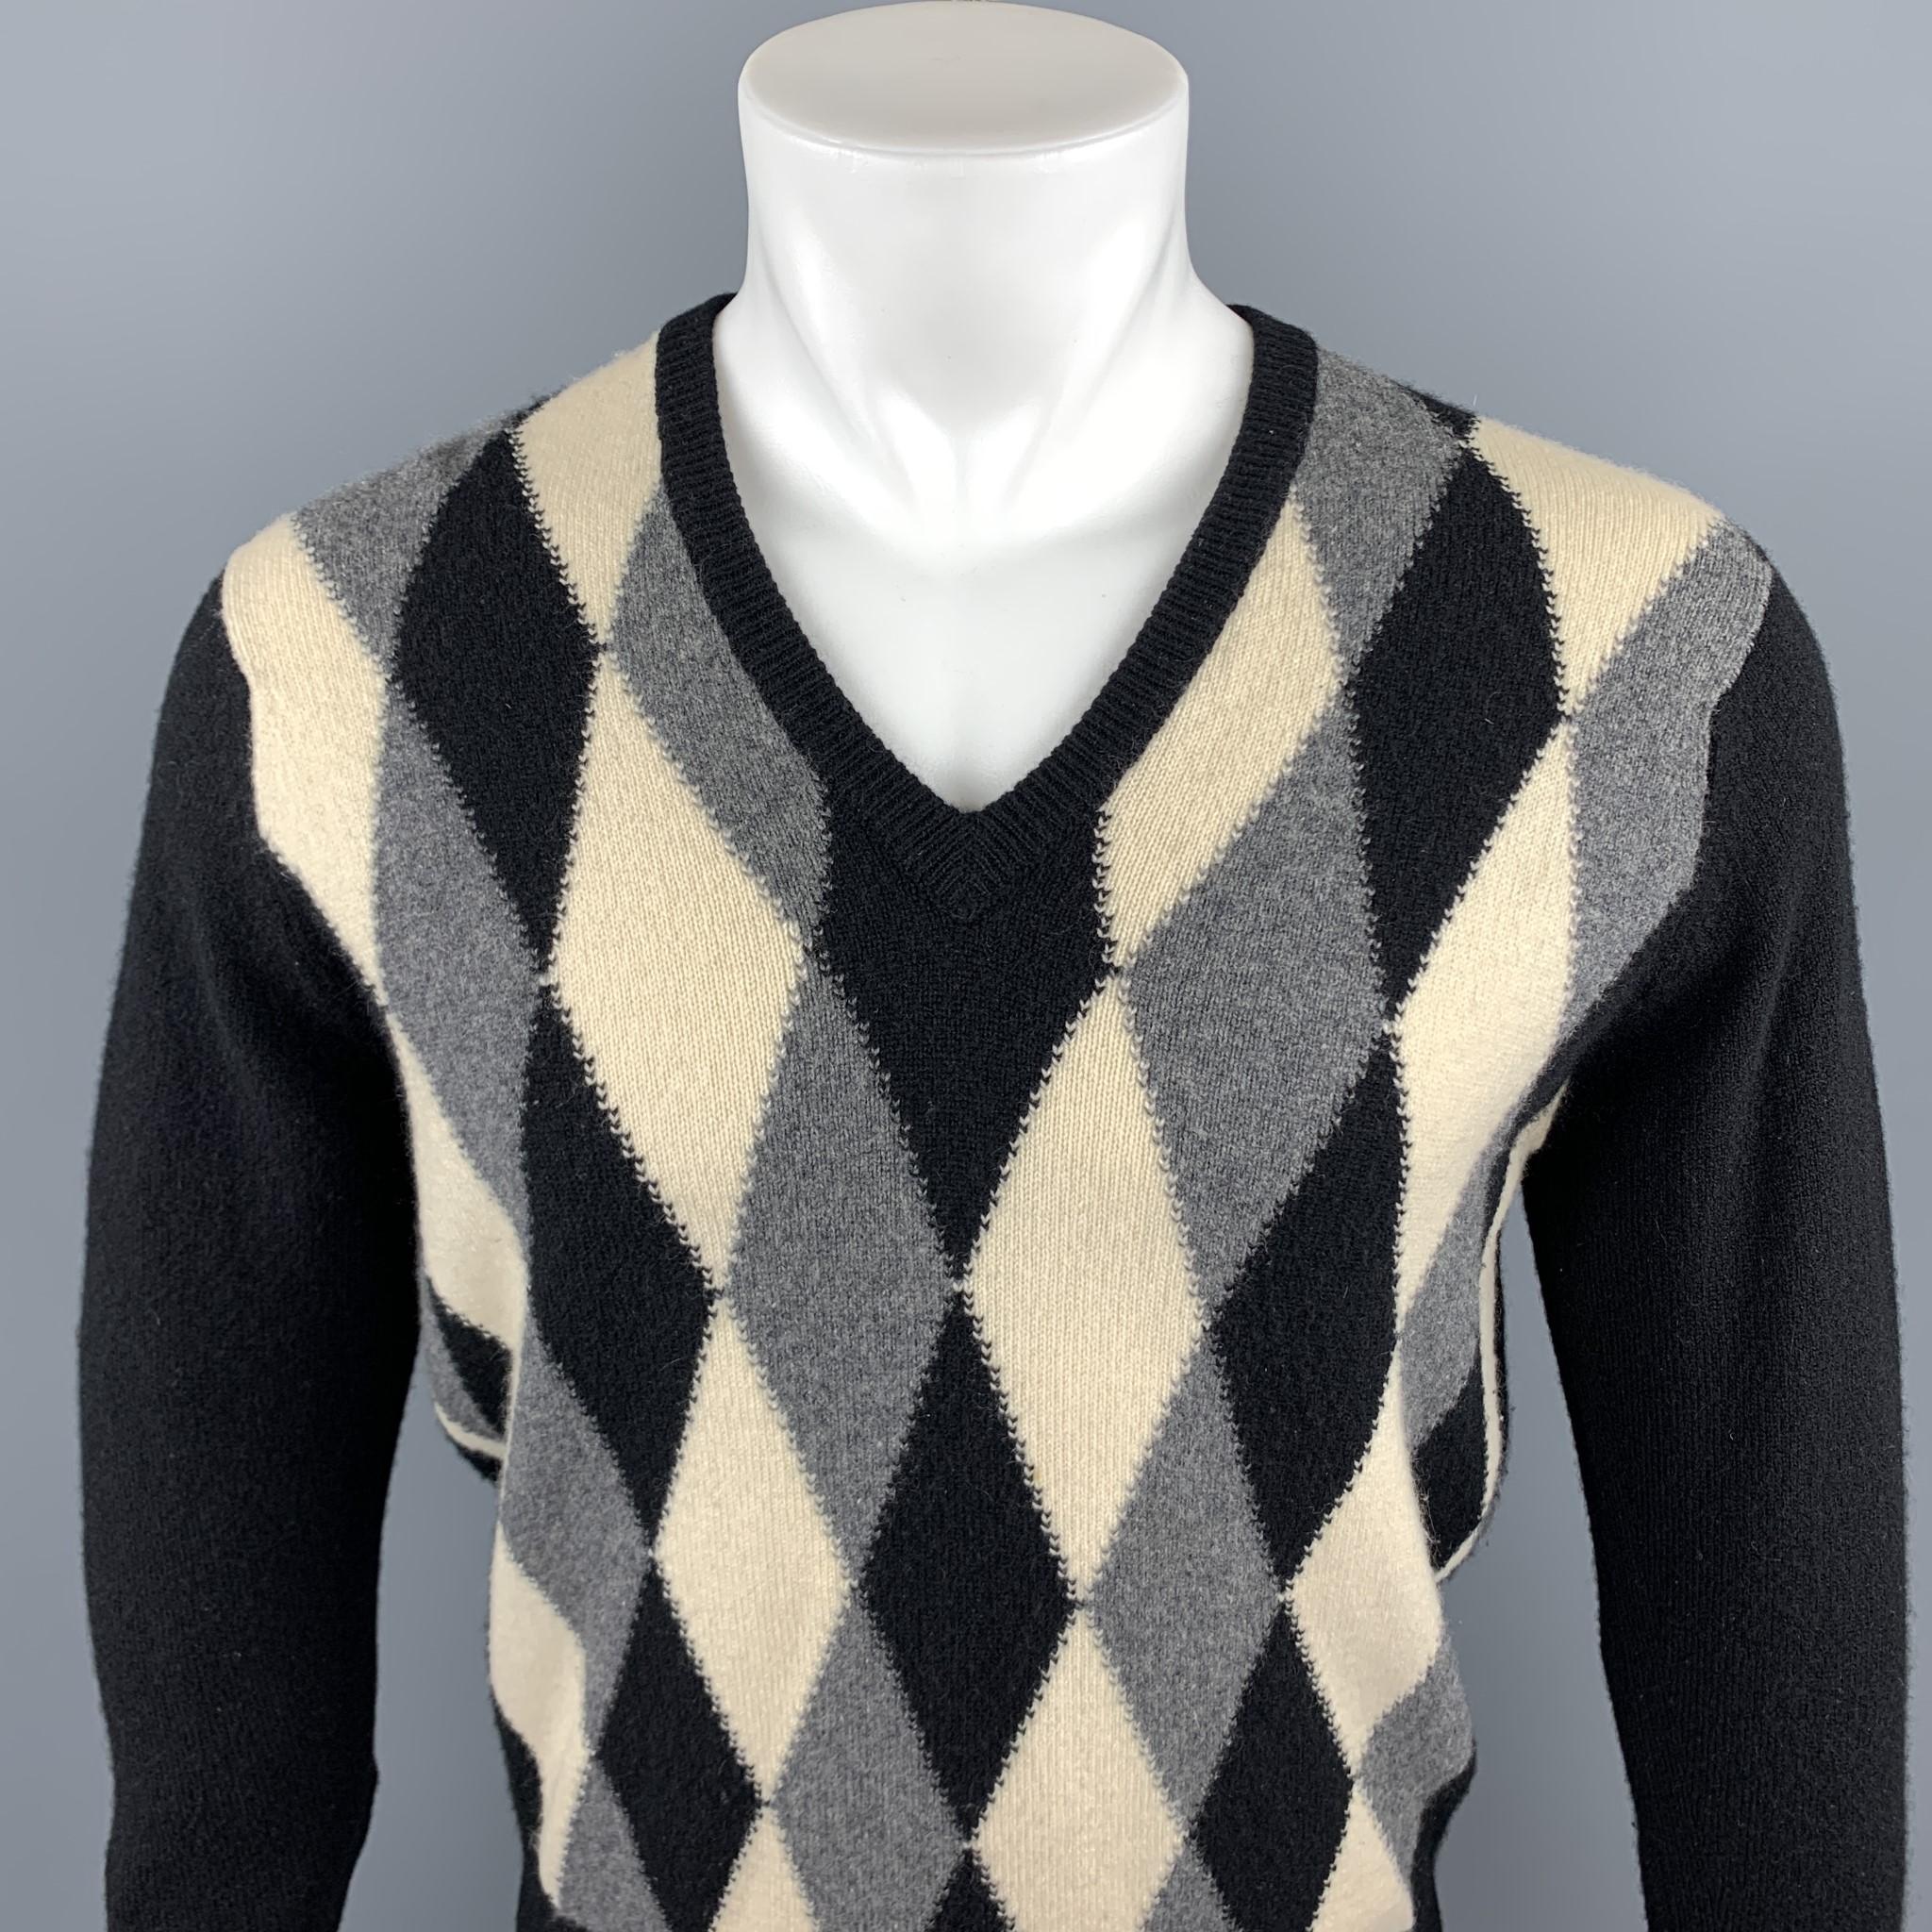 NEIMAN MARCUS pullover sweater comes in a black & gray argyle cashmere featuring a ribbed v-neck. Minor tear in the back of sweater. As Is. Made in Scotland. 

Very Good Pre-Owned Condition.
Marked: No Size Marked

Measurements:

Shoulder: 17.5 in.